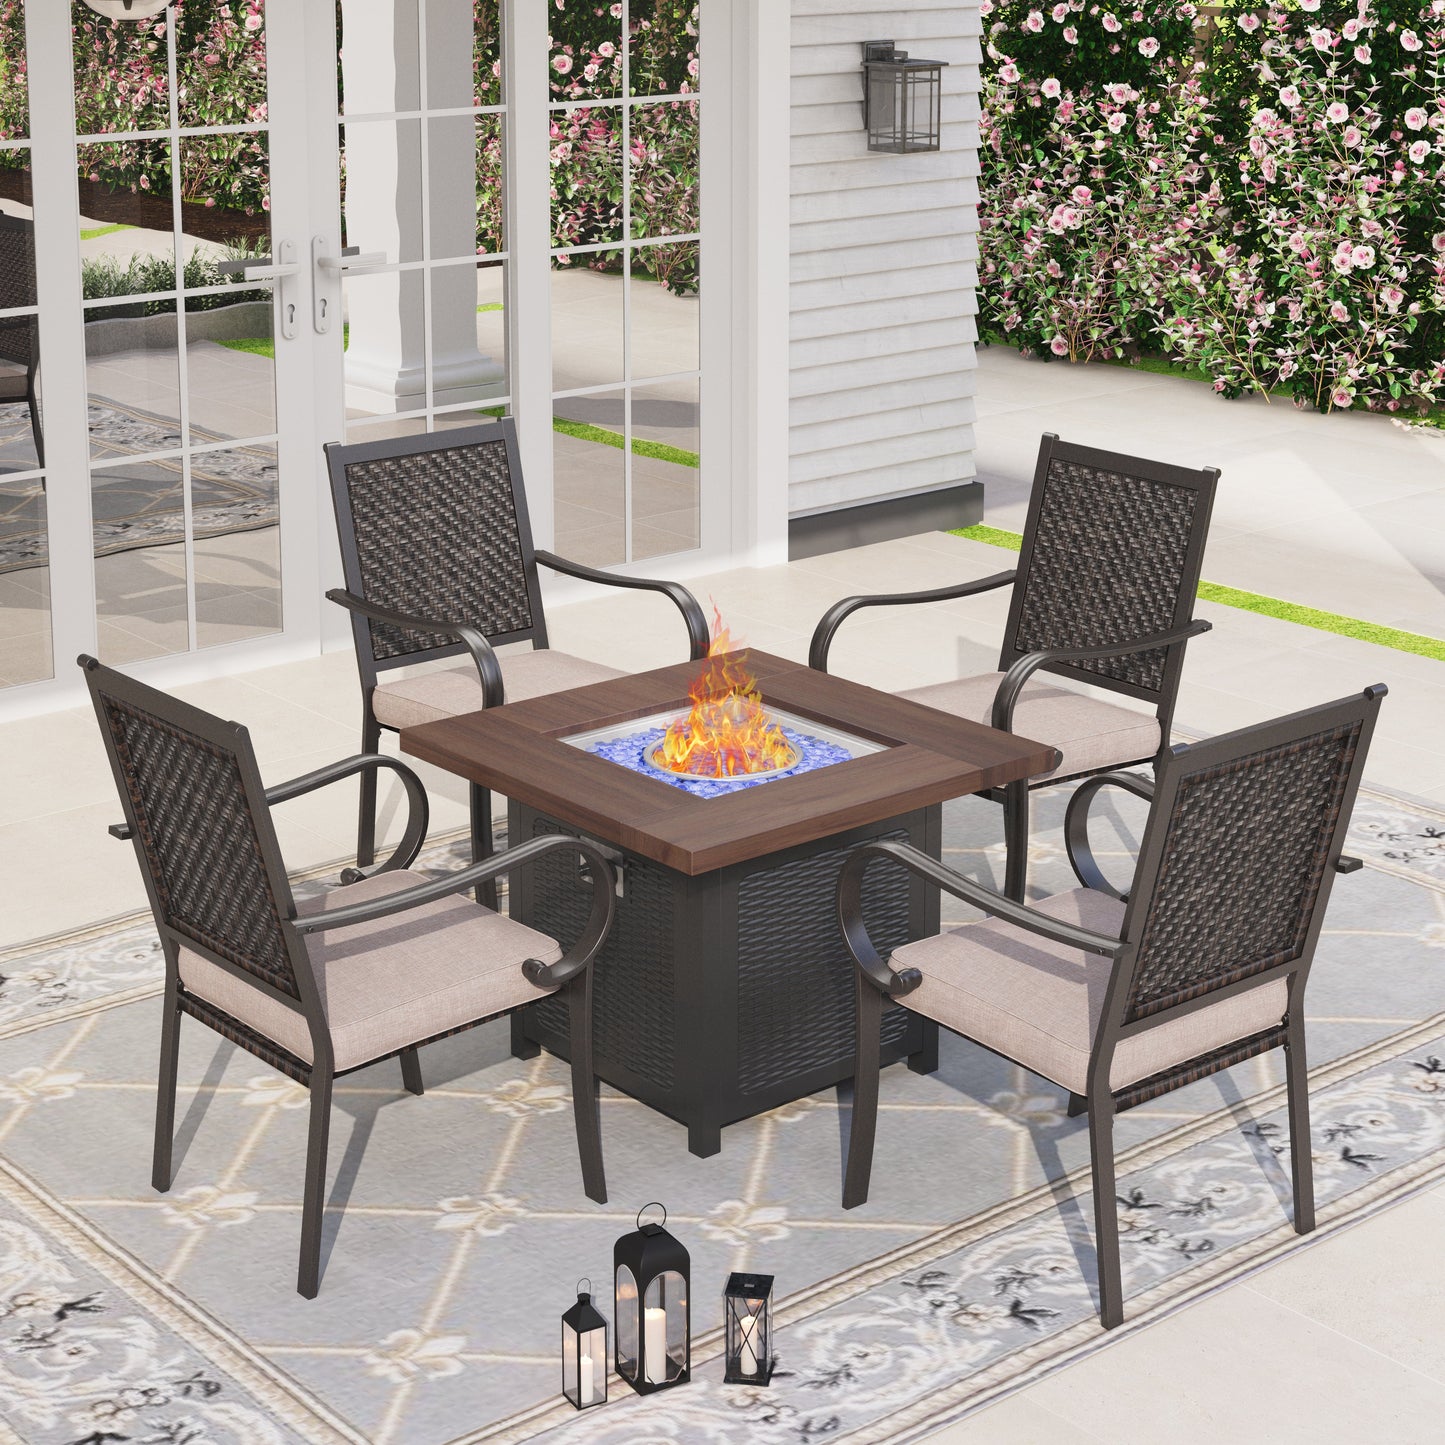 Sophia & William 5 Pieces Outdoor Patio Dining Set Rattan Chairs and Fire Pit Table for 4 person